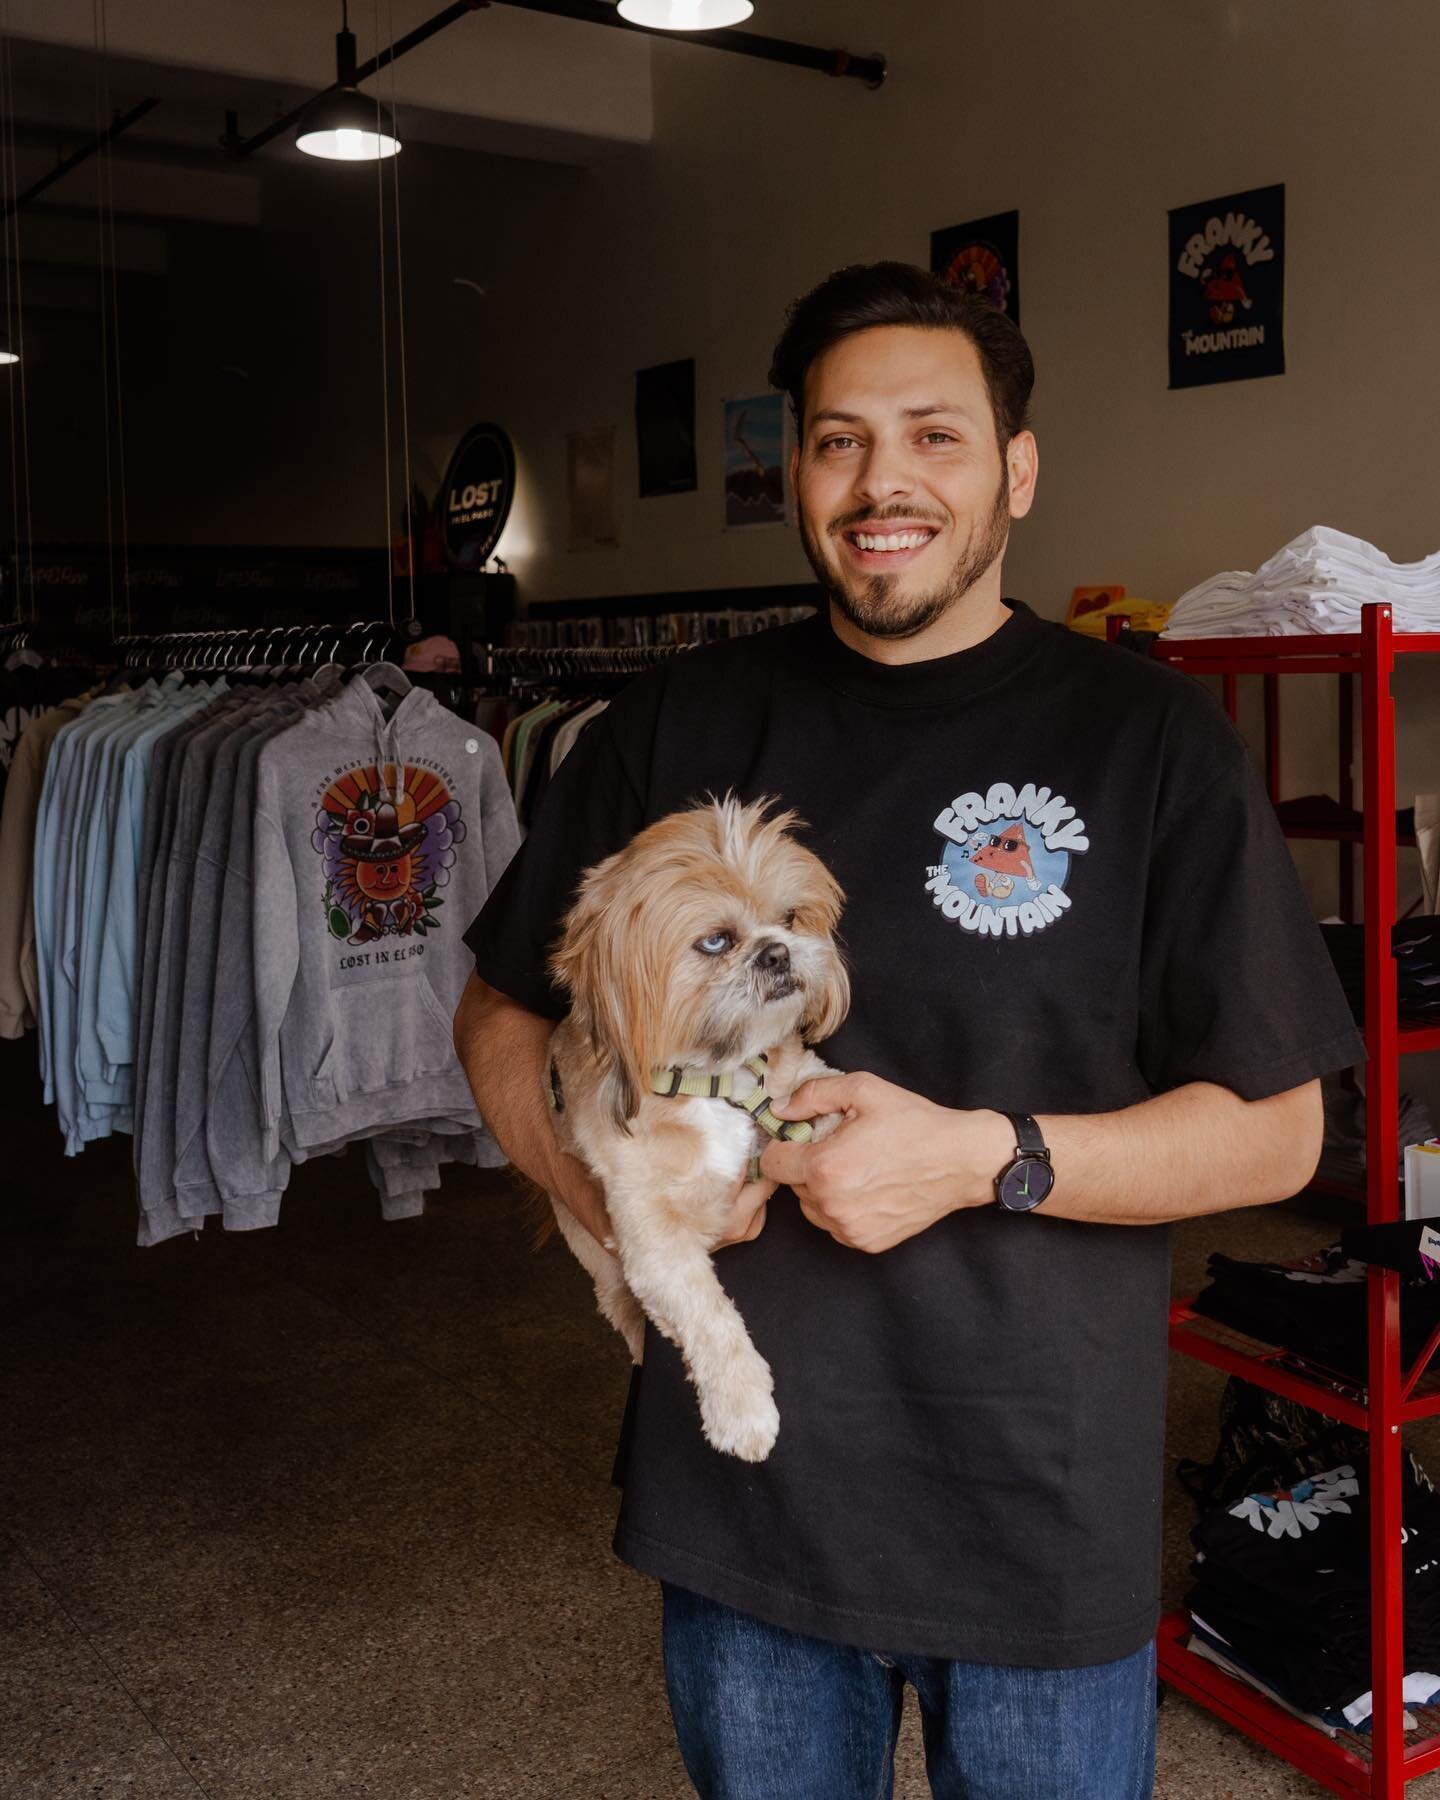 Allow us to introduce our community partner, @lostinelpaso, who has been instrumental in creating our apparel since our inception in 2020.

Lost in El Paso, a remarkable family business, embarked on their journey when Nick, the founder, started worki